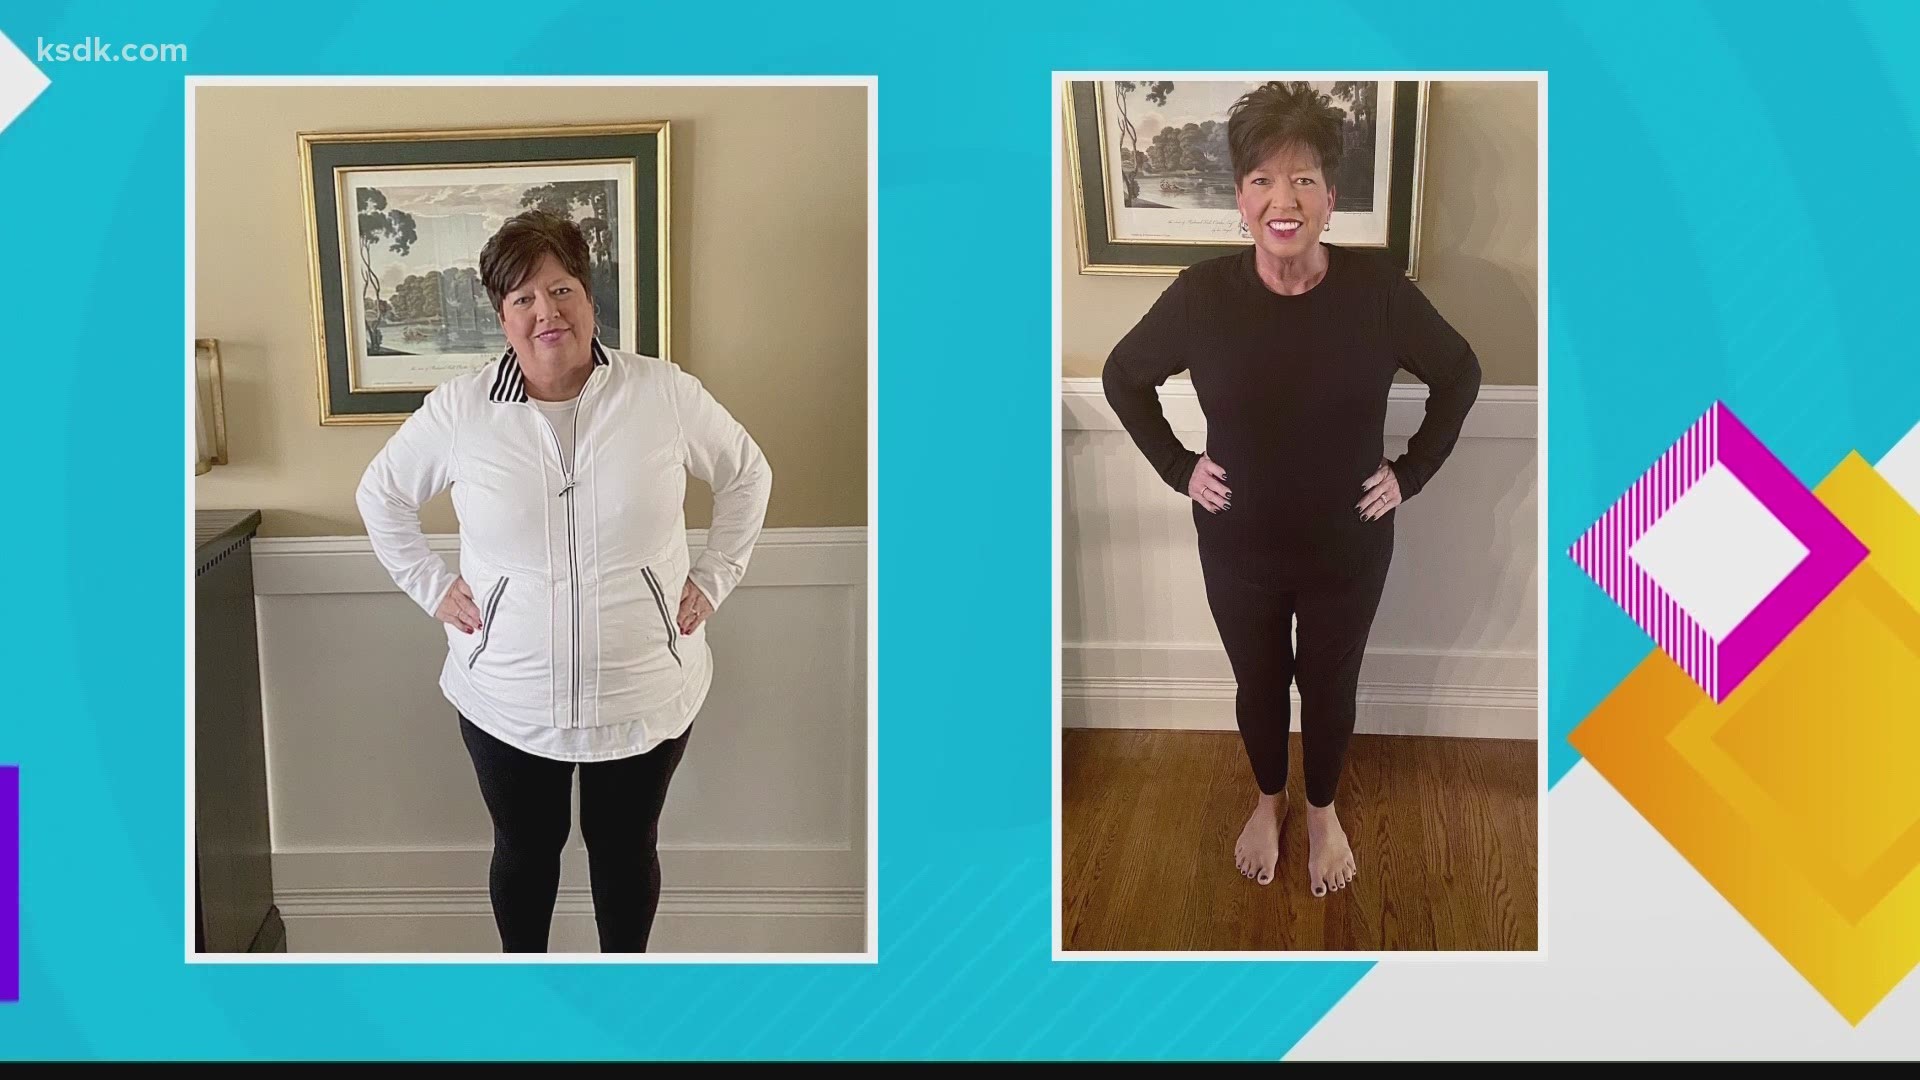 Meet another successful client of Charles D’Angelo who was able to successfully change her mindset.